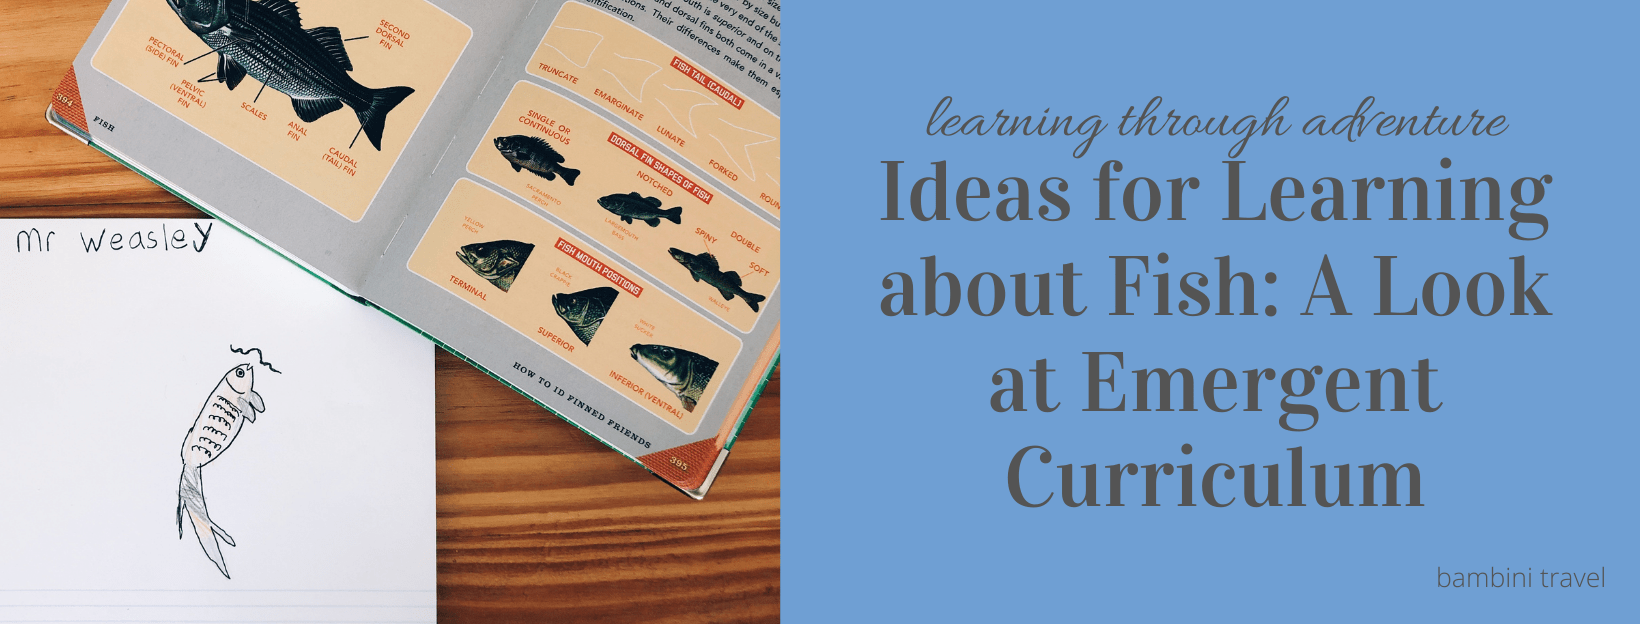 Ideas for Learning about Fish: A Look at Emergent Curriculum